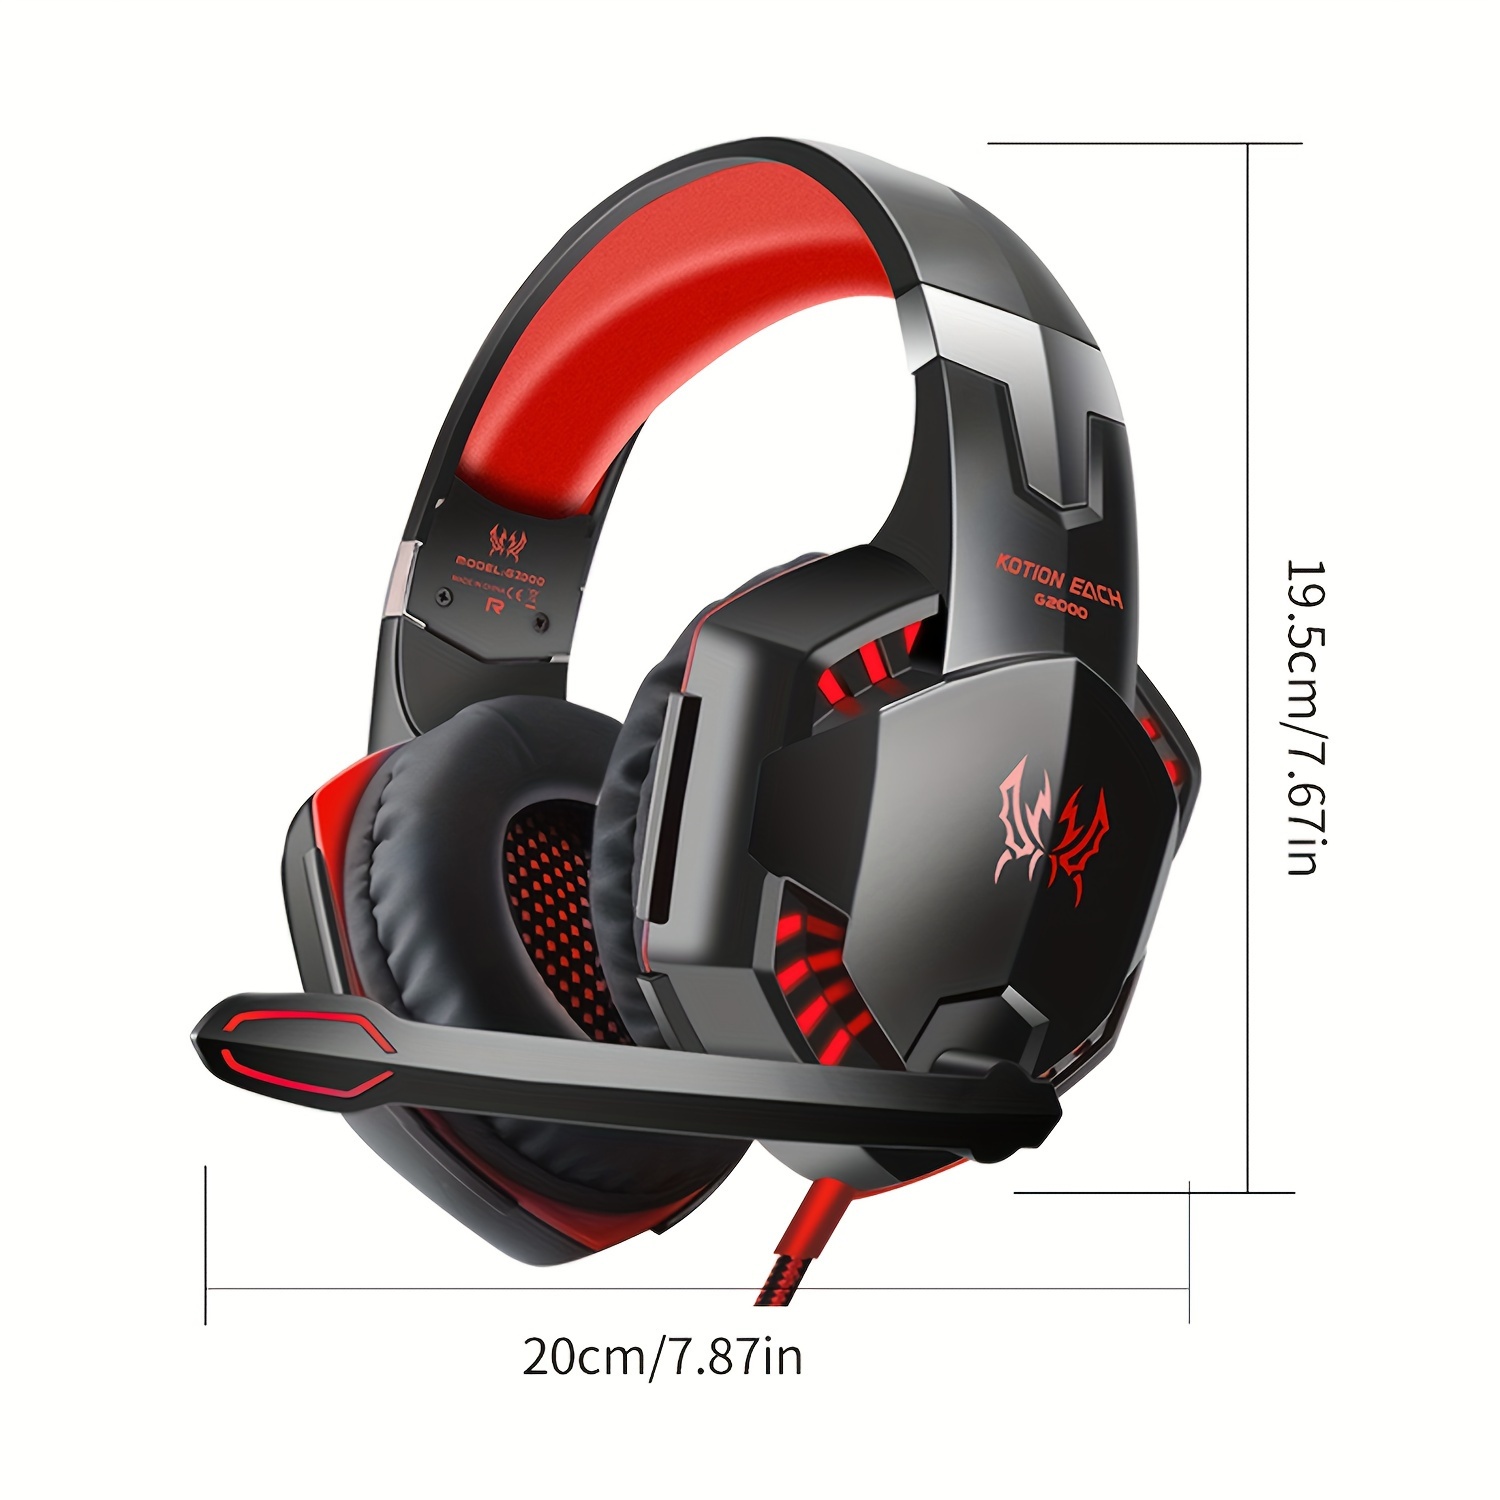 G2000 Gaming Headset: Experience Immersive Audio With Noise